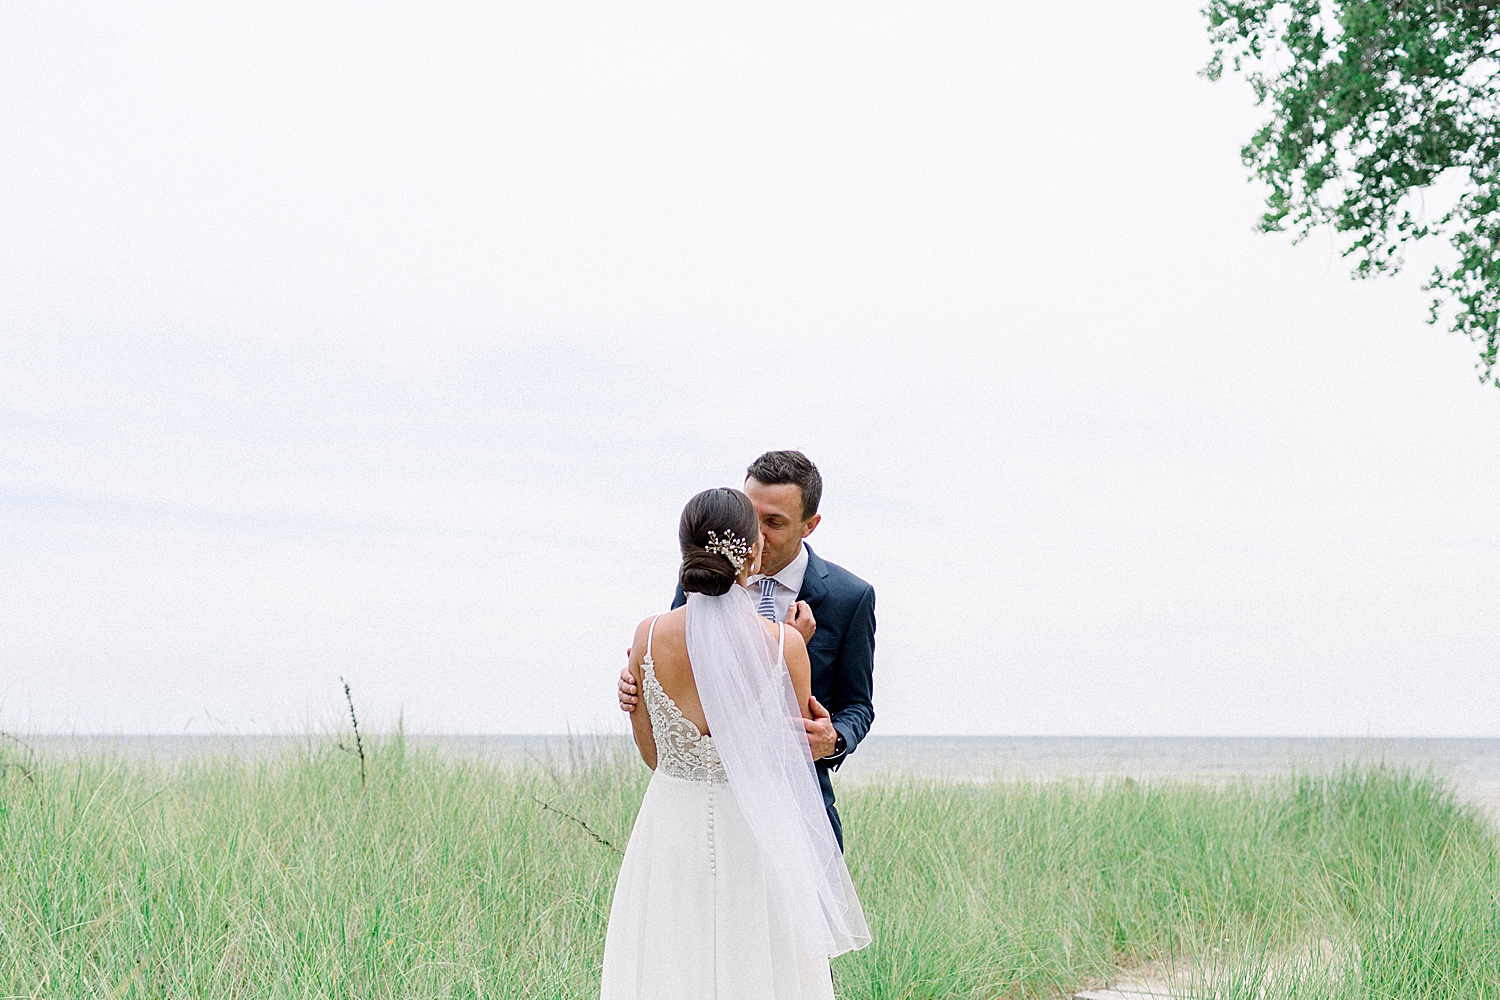 About Thyme Wedding